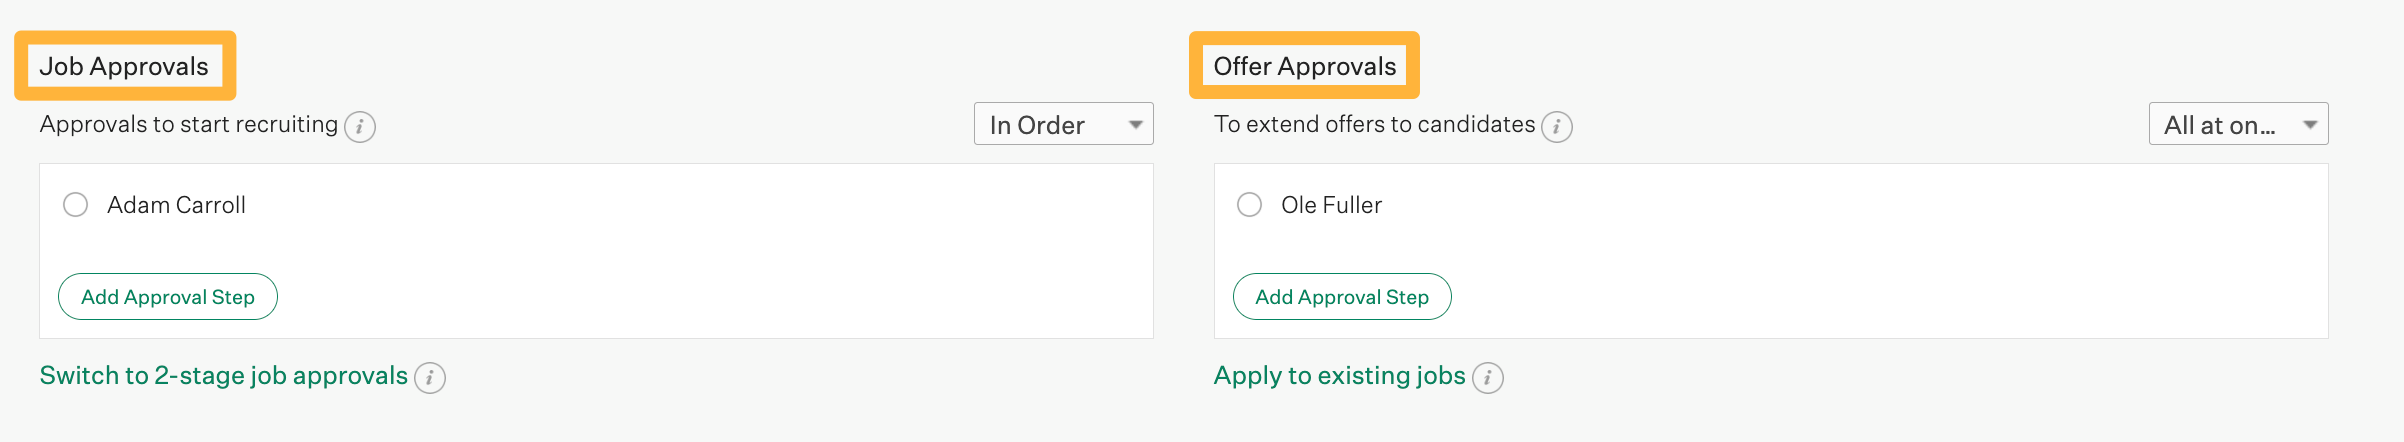 Approvals page with the job approvals section and offer approvals section highlighted separately